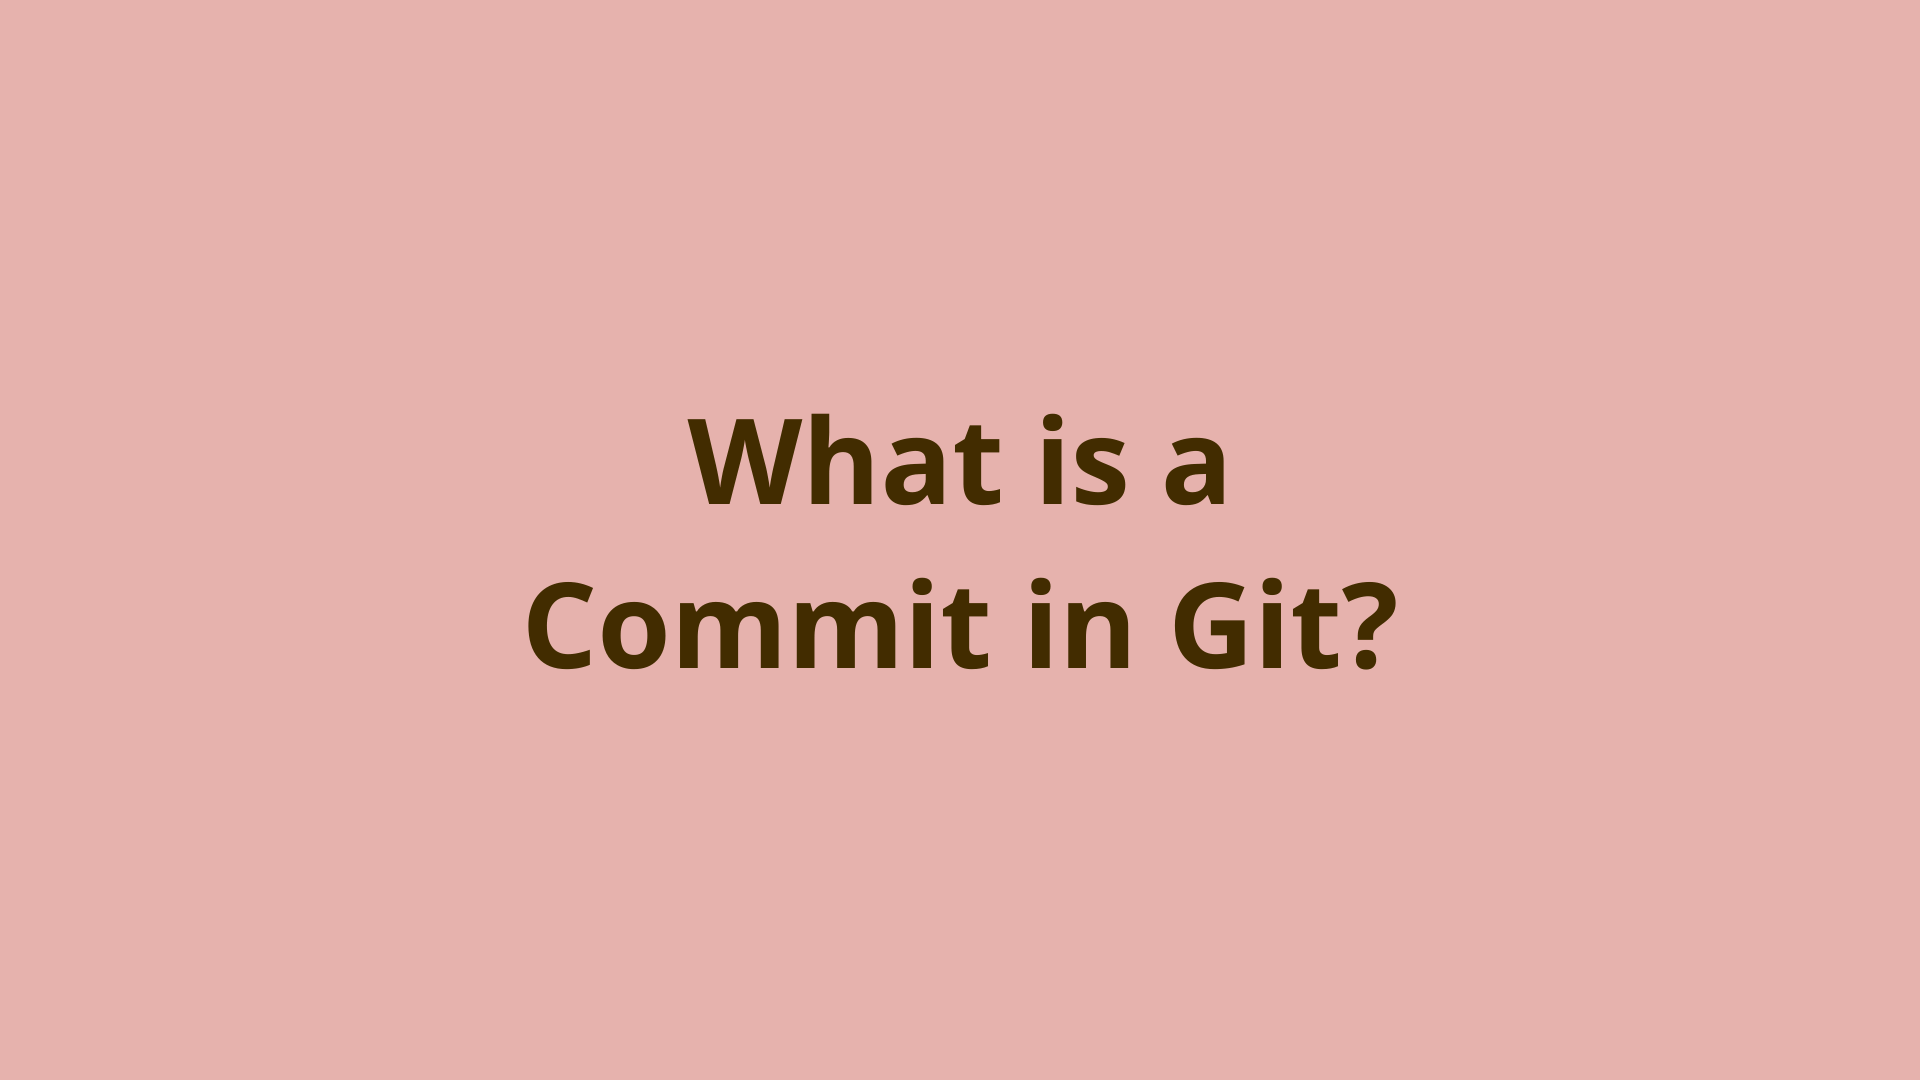 Image of What is a commit in Git?